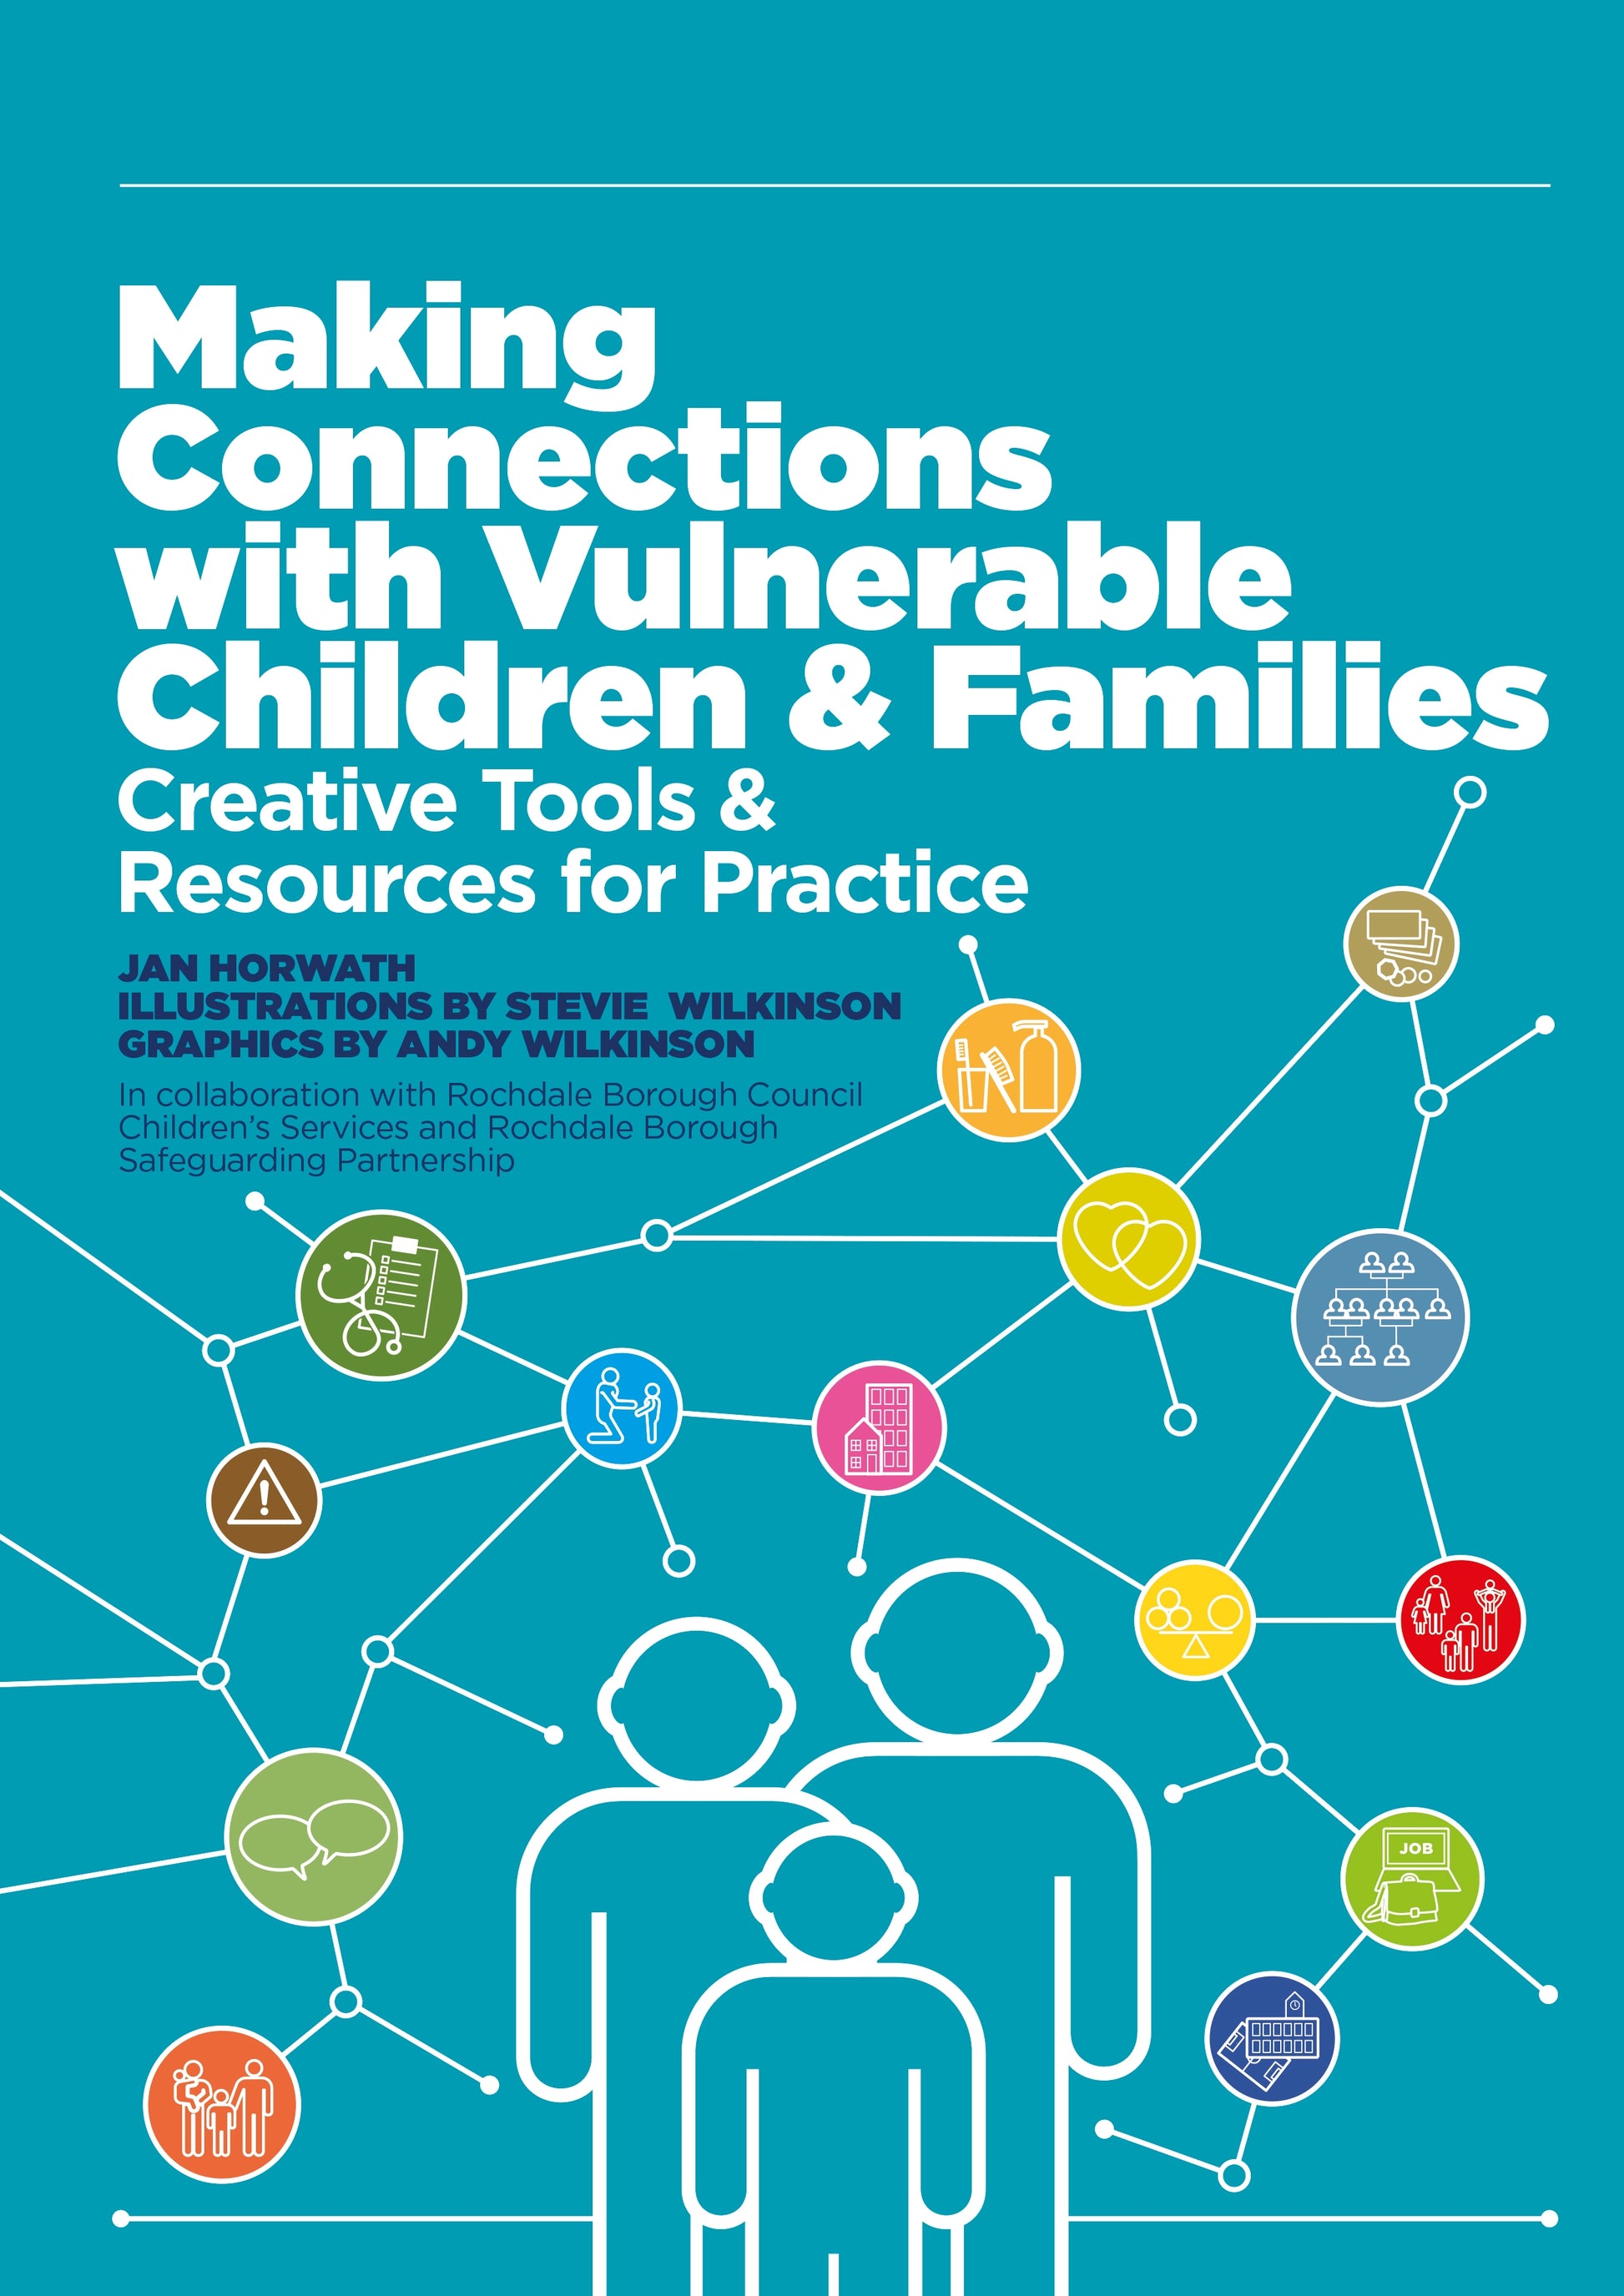 Making Connections with Vulnerable Children and Families by Jan Horwath, Stevie Wilkinson